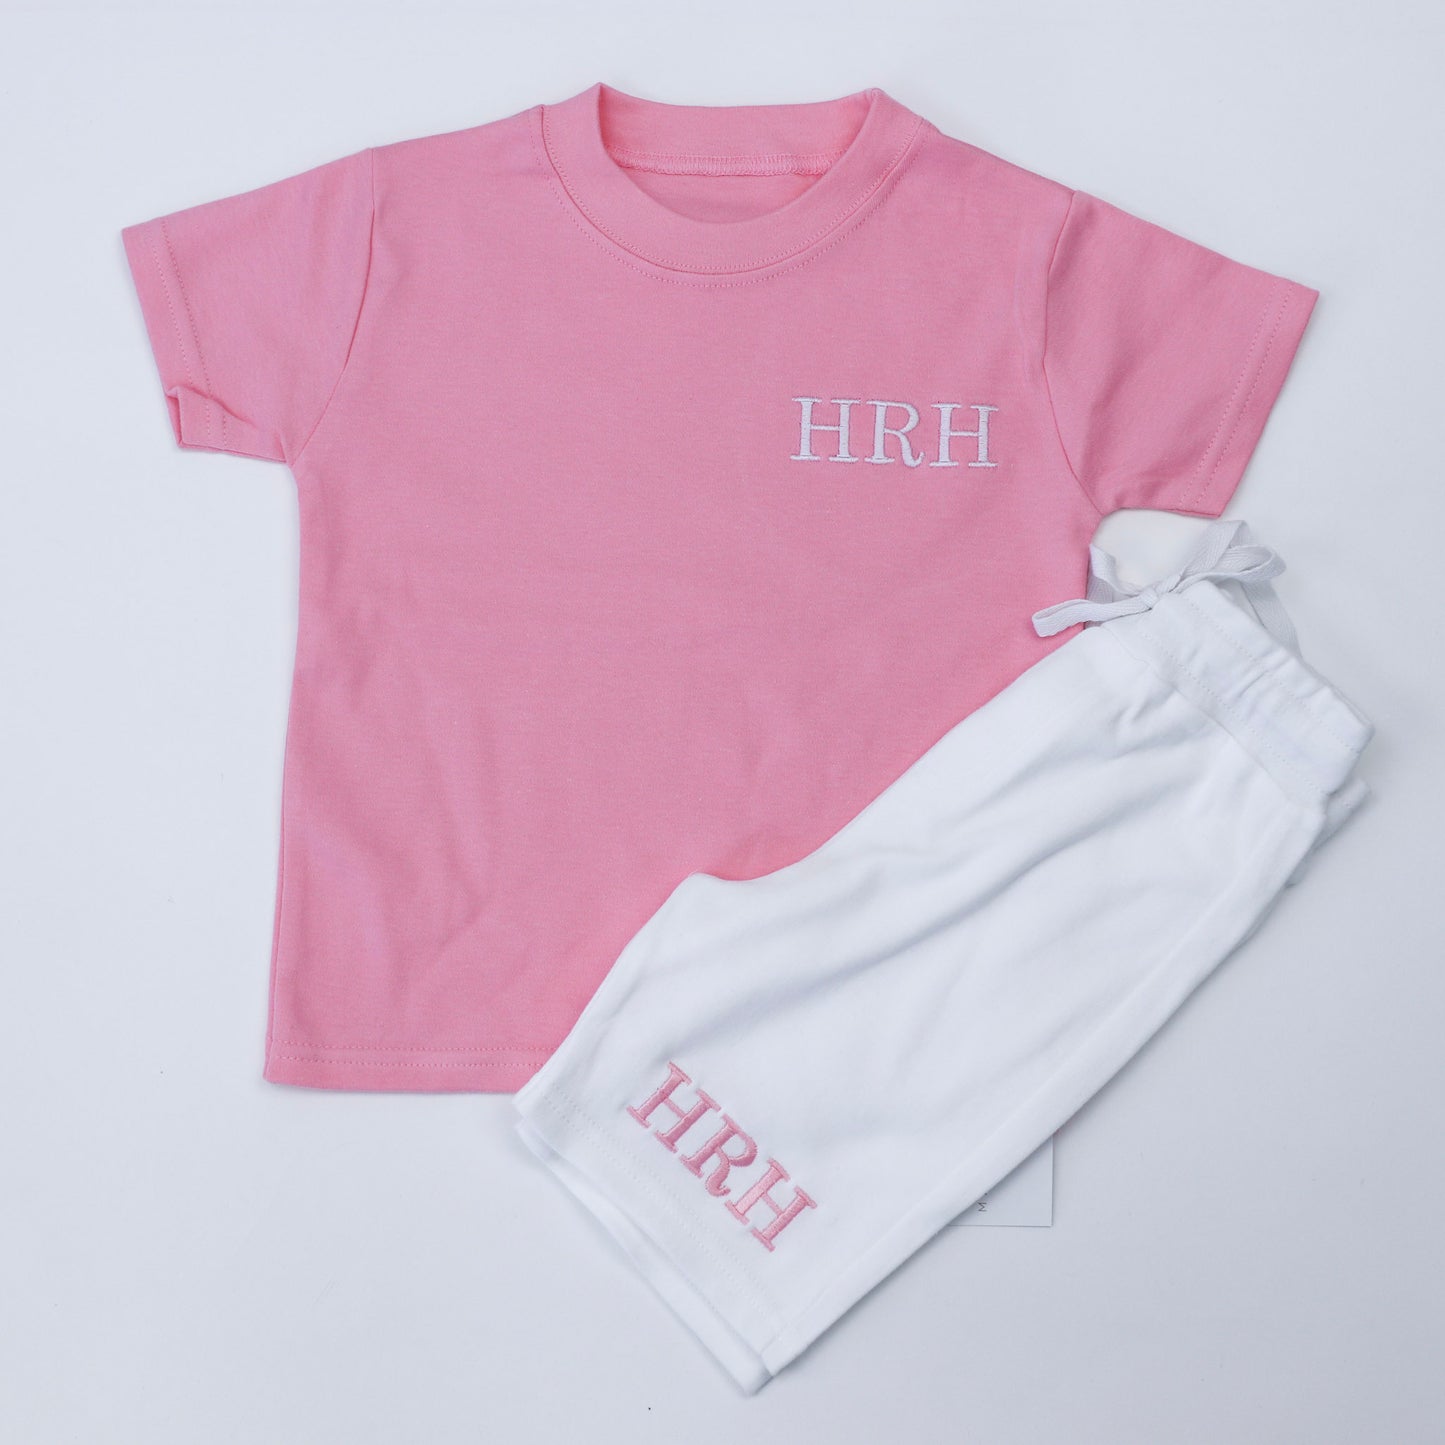 Light Pink T-Shirt + ALL COLOUR OPTIONS Cotton Shorts Combo Embroidered Set